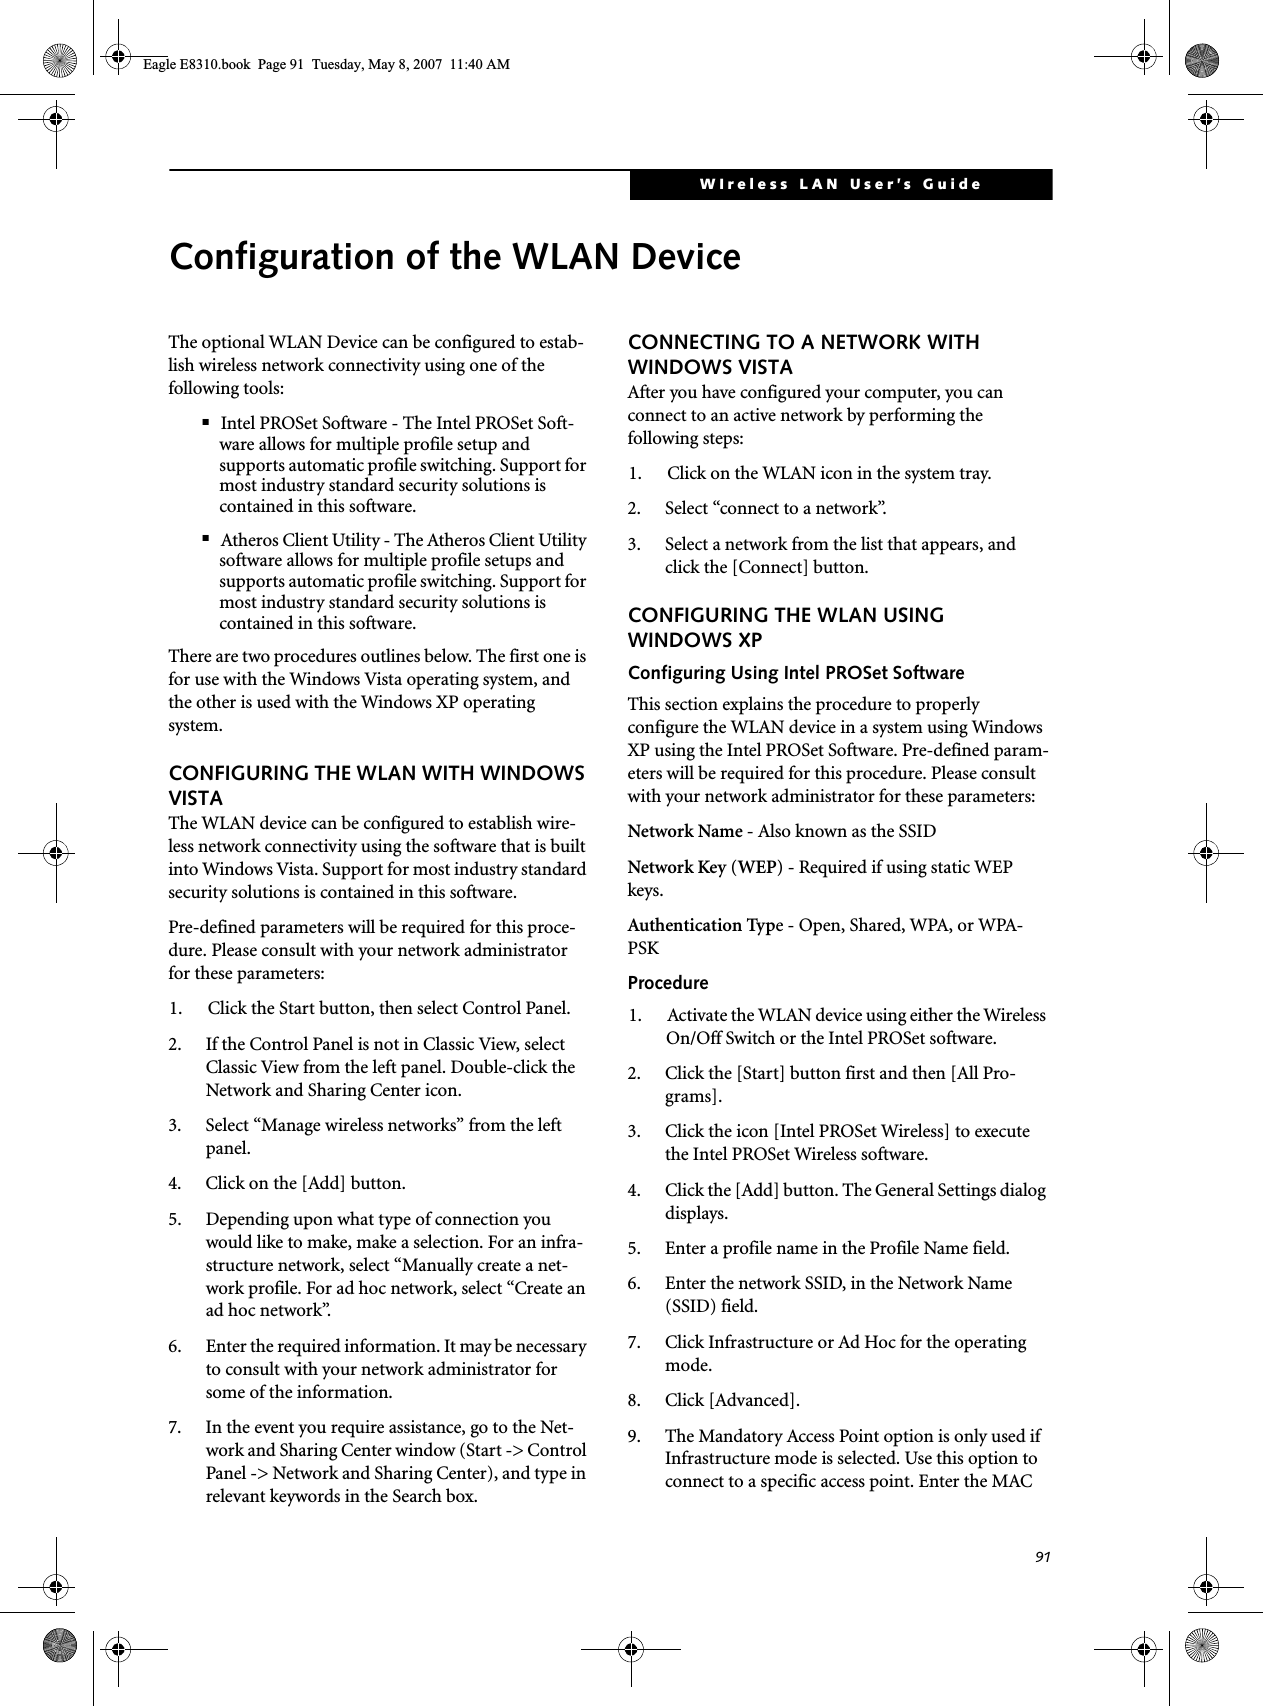 91WIreless LAN User’s Guide Configuration of the WLAN DeviceThe optional WLAN Device can be configured to estab-lish wireless network connectivity using one of the following tools:■Intel PROSet Software - The Intel PROSet Soft-ware allows for multiple profile setup and supports automatic profile switching. Support for most industry standard security solutions is contained in this software.■Atheros Client Utility - The Atheros Client Utility software allows for multiple profile setups and supports automatic profile switching. Support for most industry standard security solutions is contained in this software.There are two procedures outlines below. The first one is for use with the Windows Vista operating system, and the other is used with the Windows XP operating system.CONFIGURING THE WLAN WITH WINDOWS VISTAThe WLAN device can be configured to establish wire-less network connectivity using the software that is built into Windows Vista. Support for most industry standard security solutions is contained in this software.Pre-defined parameters will be required for this proce-dure. Please consult with your network administrator for these parameters:1. Click the Start button, then select Control Panel.2. If the Control Panel is not in Classic View, select Classic View from the left panel. Double-click the Network and Sharing Center icon.3. Select “Manage wireless networks” from the left panel.4. Click on the [Add] button.5. Depending upon what type of connection you would like to make, make a selection. For an infra-structure network, select “Manually create a net-work profile. For ad hoc network, select “Create an ad hoc network”.6. Enter the required information. It may be necessary to consult with your network administrator for some of the information.7. In the event you require assistance, go to the Net-work and Sharing Center window (Start -&gt; Control Panel -&gt; Network and Sharing Center), and type in relevant keywords in the Search box. CONNECTING TO A NETWORK WITH WINDOWS VISTAAfter you have configured your computer, you can connect to an active network by performing the following steps:1. Click on the WLAN icon in the system tray.2. Select “connect to a network”.3. Select a network from the list that appears, and click the [Connect] button.CONFIGURING THE WLAN USING WINDOWS XP Configuring Using Intel PROSet SoftwareThis section explains the procedure to properly configure the WLAN device in a system using Windows XP using the Intel PROSet Software. Pre-defined param-eters will be required for this procedure. Please consult with your network administrator for these parameters:Network Name - Also known as the SSIDNetwork Key (WEP) - Required if using static WEP keys. Authentication Type - Open, Shared, WPA, or WPA-PSKProcedure1. Activate the WLAN device using either the Wireless On/Off Switch or the Intel PROSet software.2. Click the [Start] button first and then [All Pro-grams].3. Click the icon [Intel PROSet Wireless] to execute the Intel PROSet Wireless software.4. Click the [Add] button. The General Settings dialog displays. 5. Enter a profile name in the Profile Name field. 6. Enter the network SSID, in the Network Name (SSID) field. 7. Click Infrastructure or Ad Hoc for the operating mode. 8. Click [Advanced].9. The Mandatory Access Point option is only used if Infrastructure mode is selected. Use this option to connect to a specific access point. Enter the MAC Eagle E8310.book  Page 91  Tuesday, May 8, 2007  11:40 AM